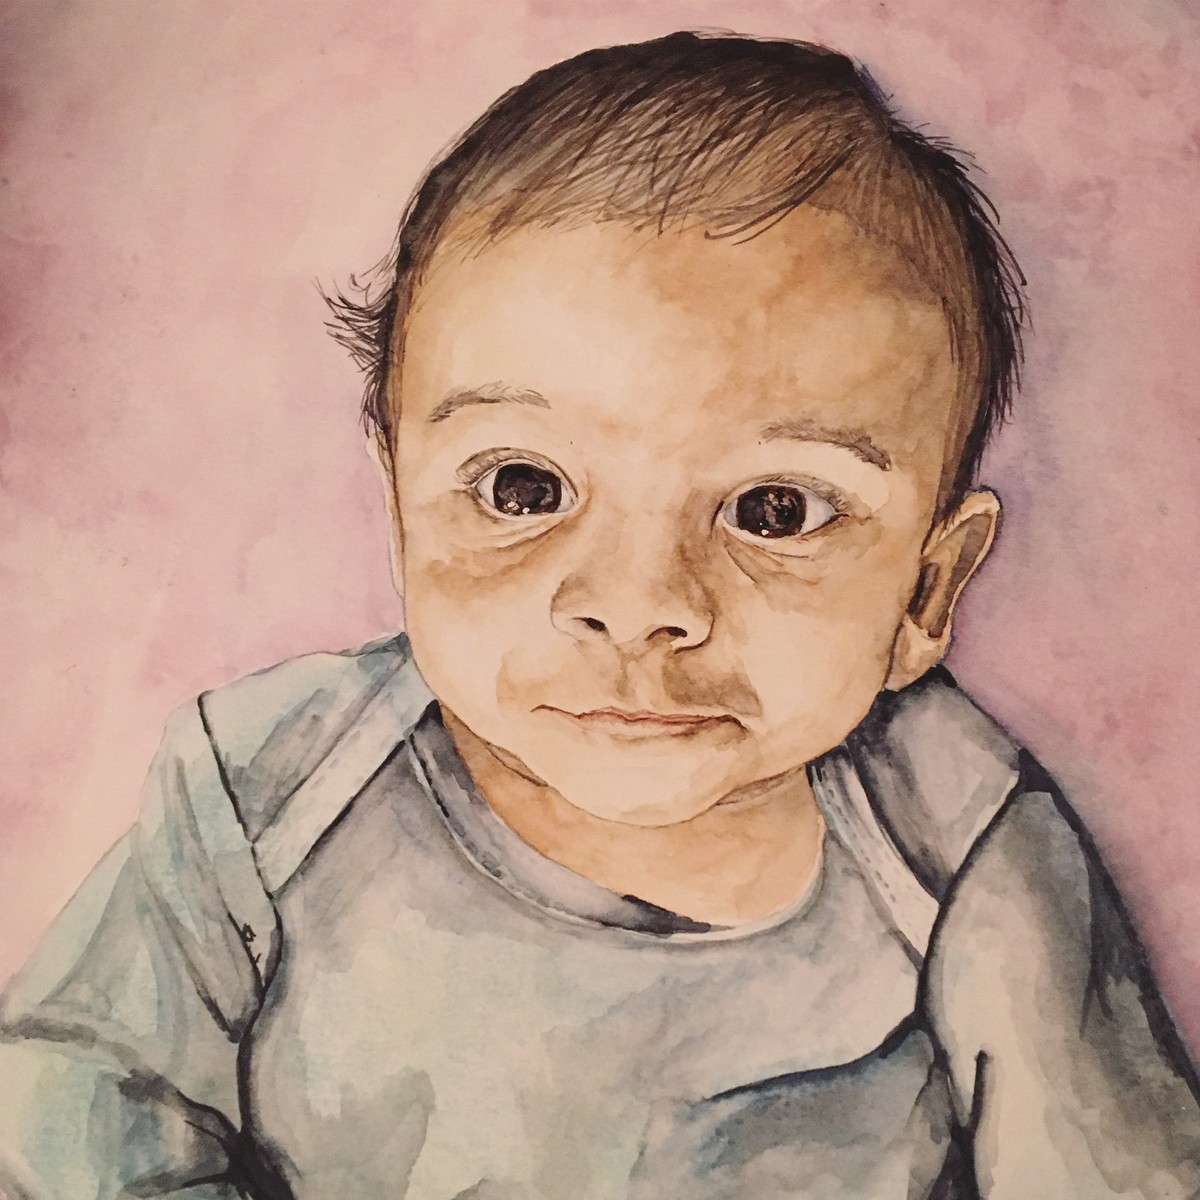 This was done as a baby shower gift, held after the birth of the child to bless the parents. Done with watercolor on watercolor paper. 